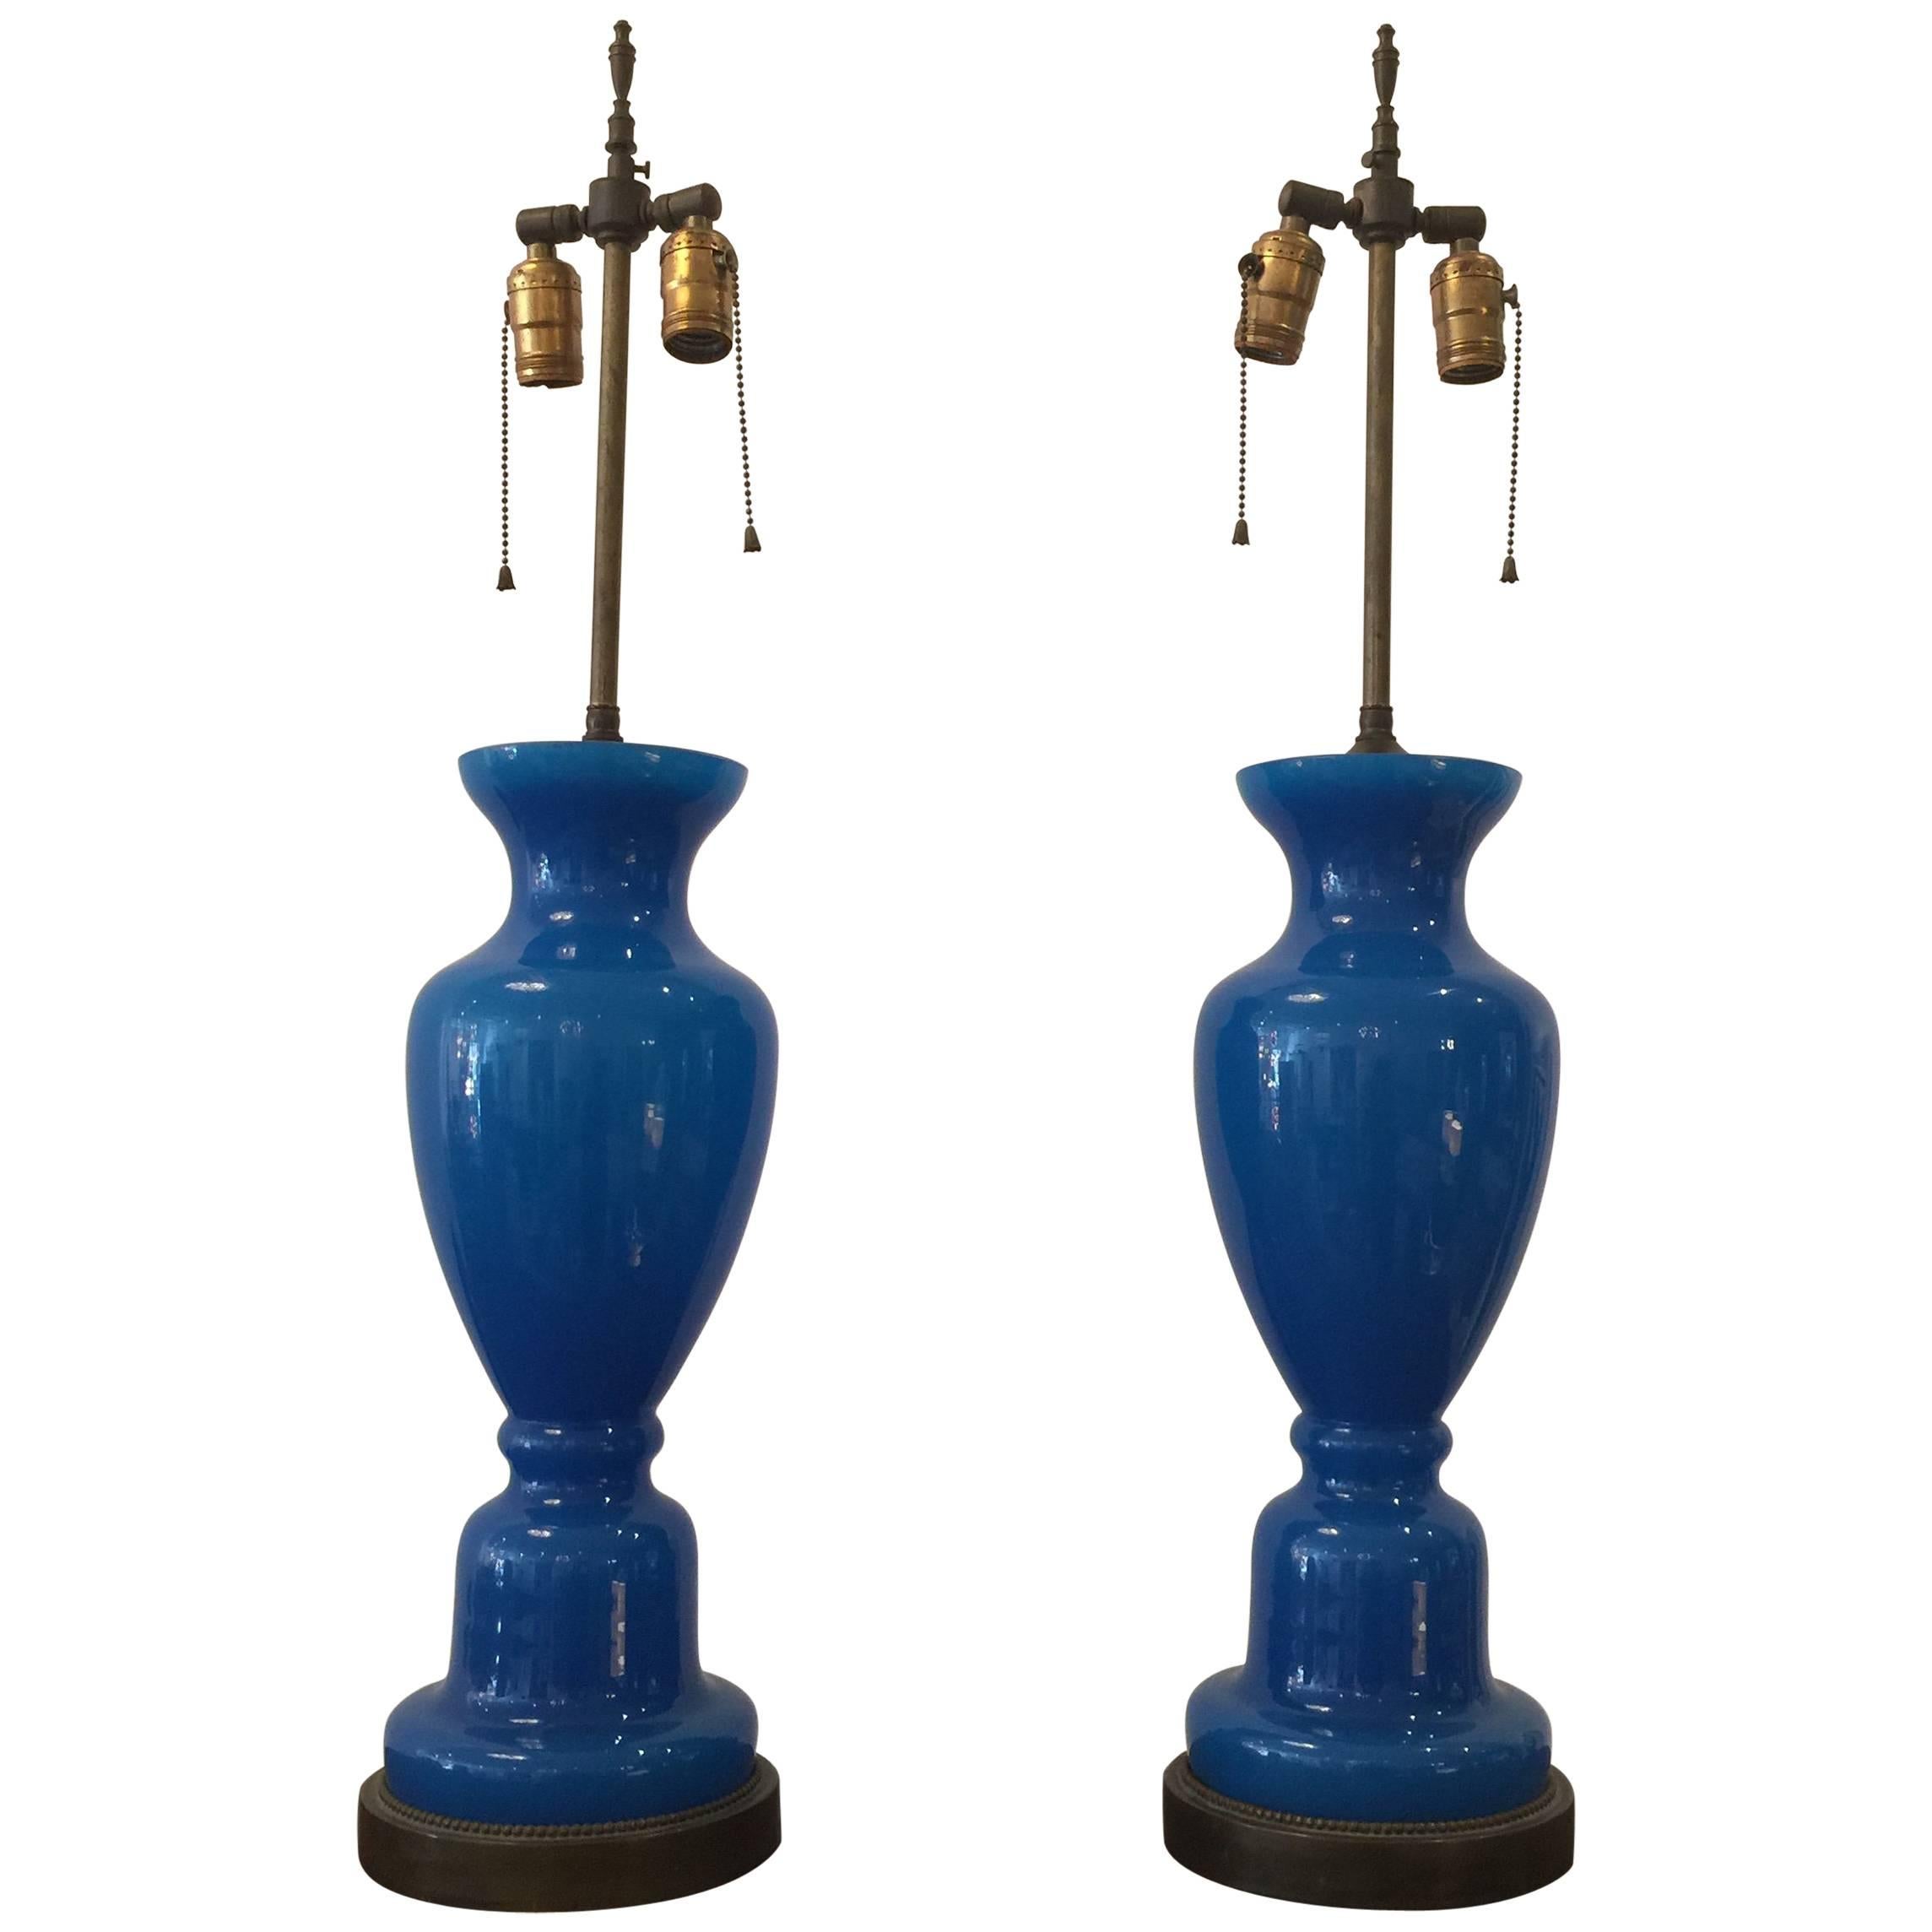 Pair of French Blue Opaline Table Lamps by Marbro Lamp Co.